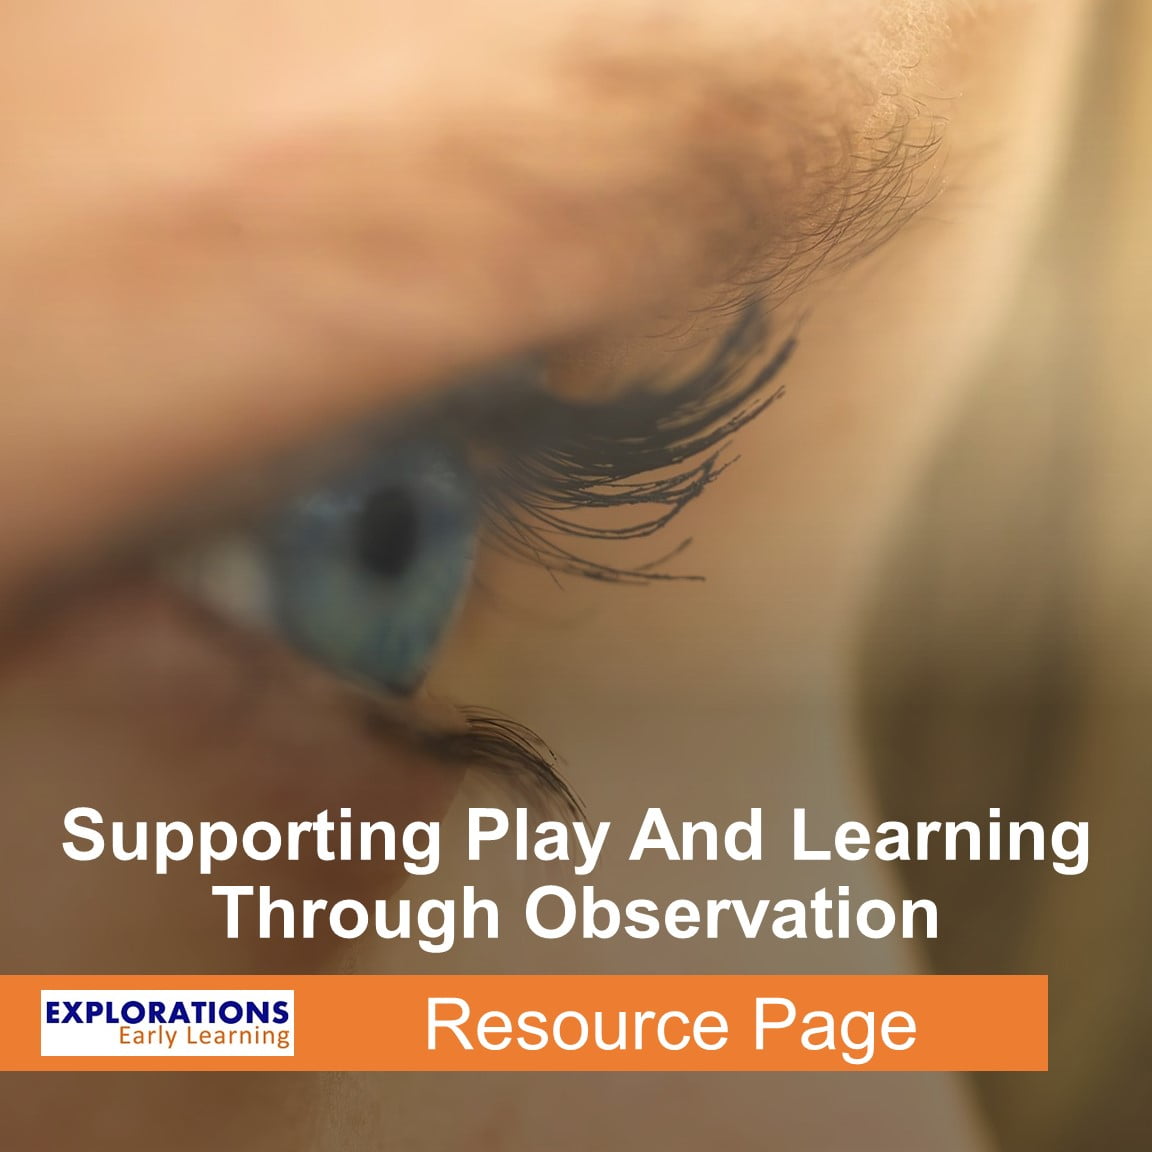 Supporting Play And Learning Through Observation